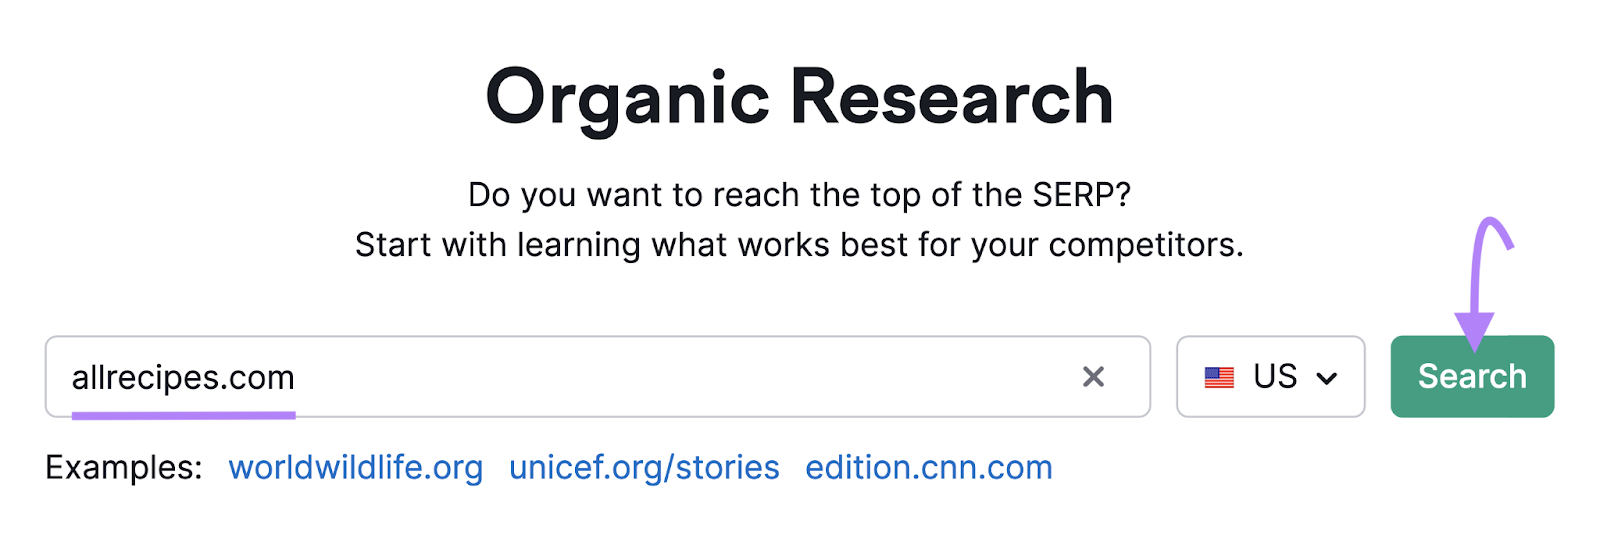 "allrecipes.com" entered into the Organic Research instrumentality   hunt  box